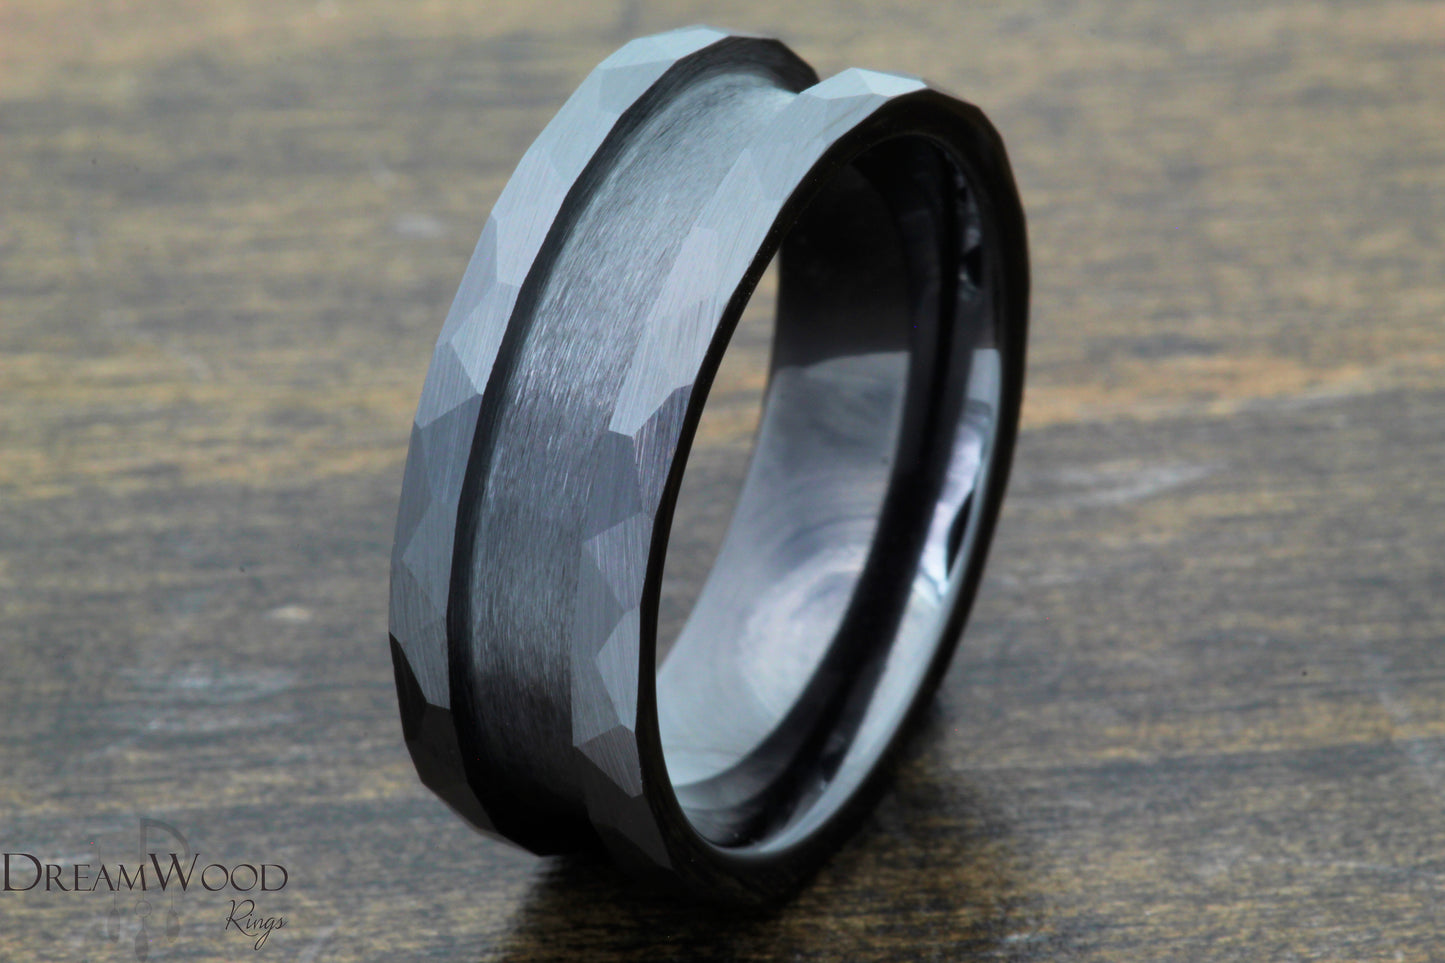 Hammered Black Ceramic blank-8mm or 6mm - DreamWood Rings Supplies